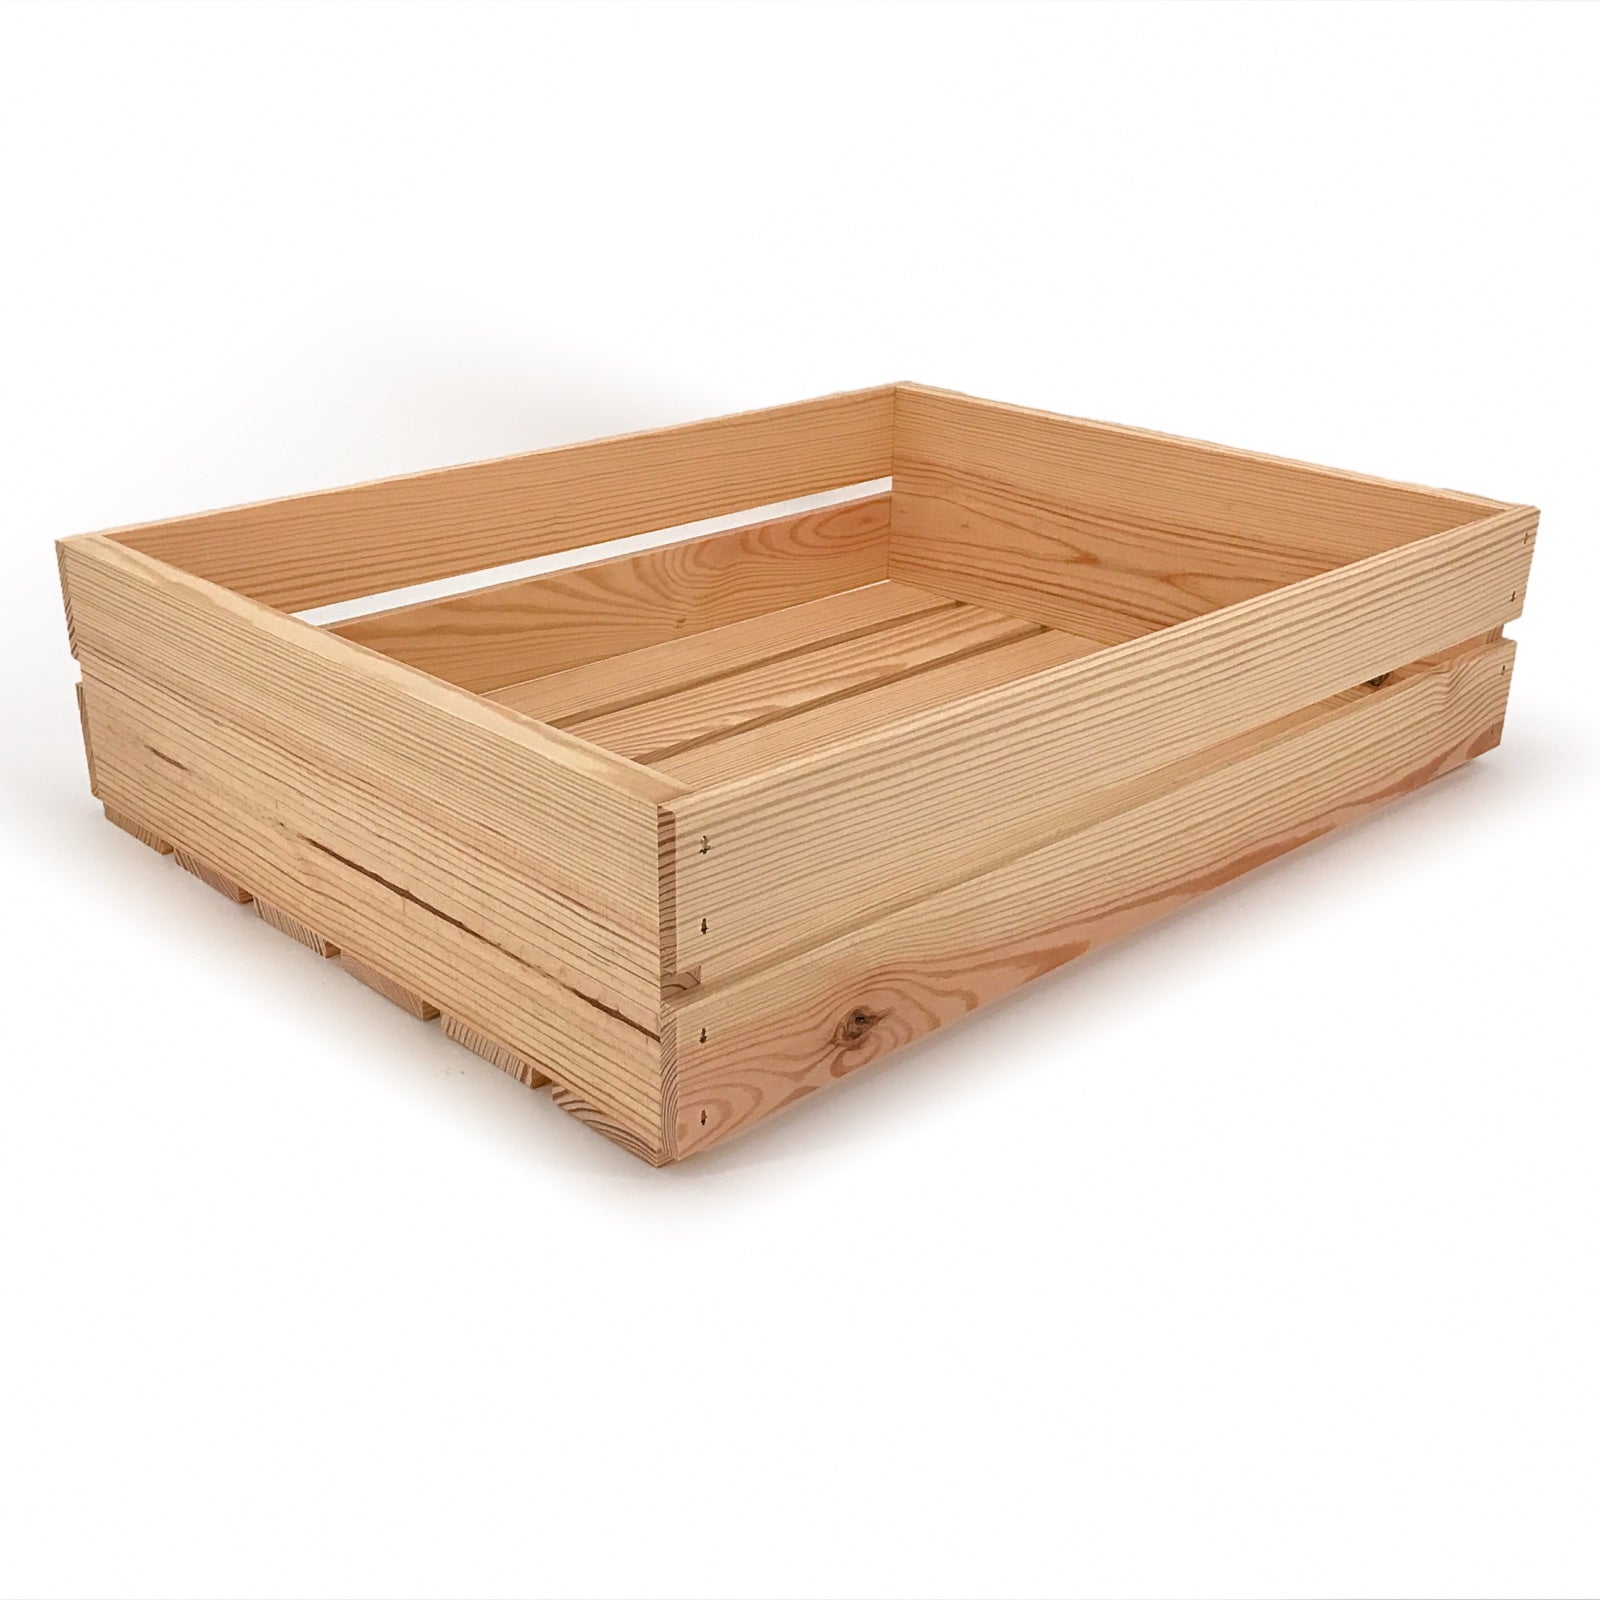 Small wooden crate 22x17x5.25